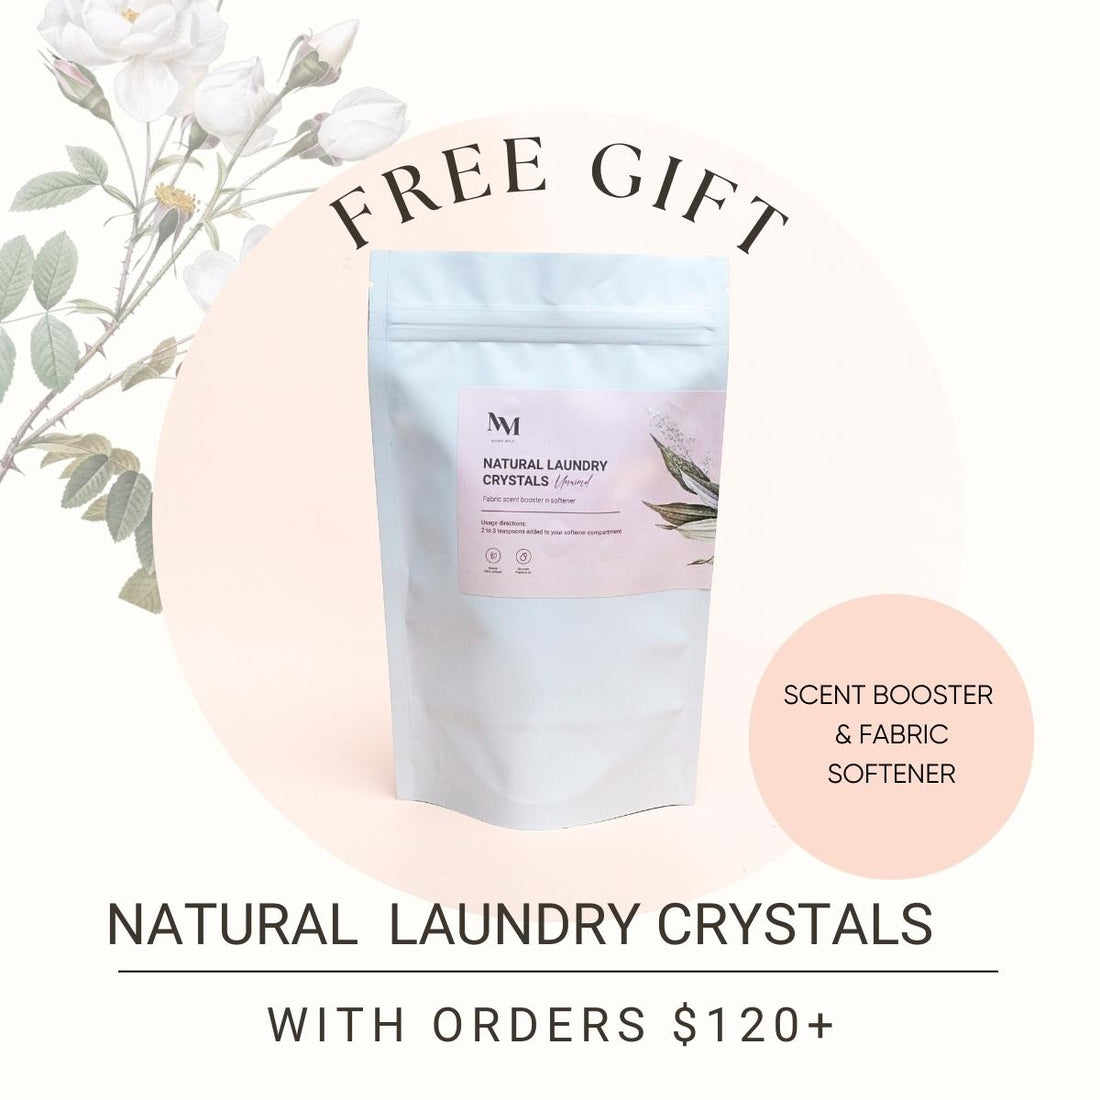 3 Ways to use our Natural Laundry Crystal